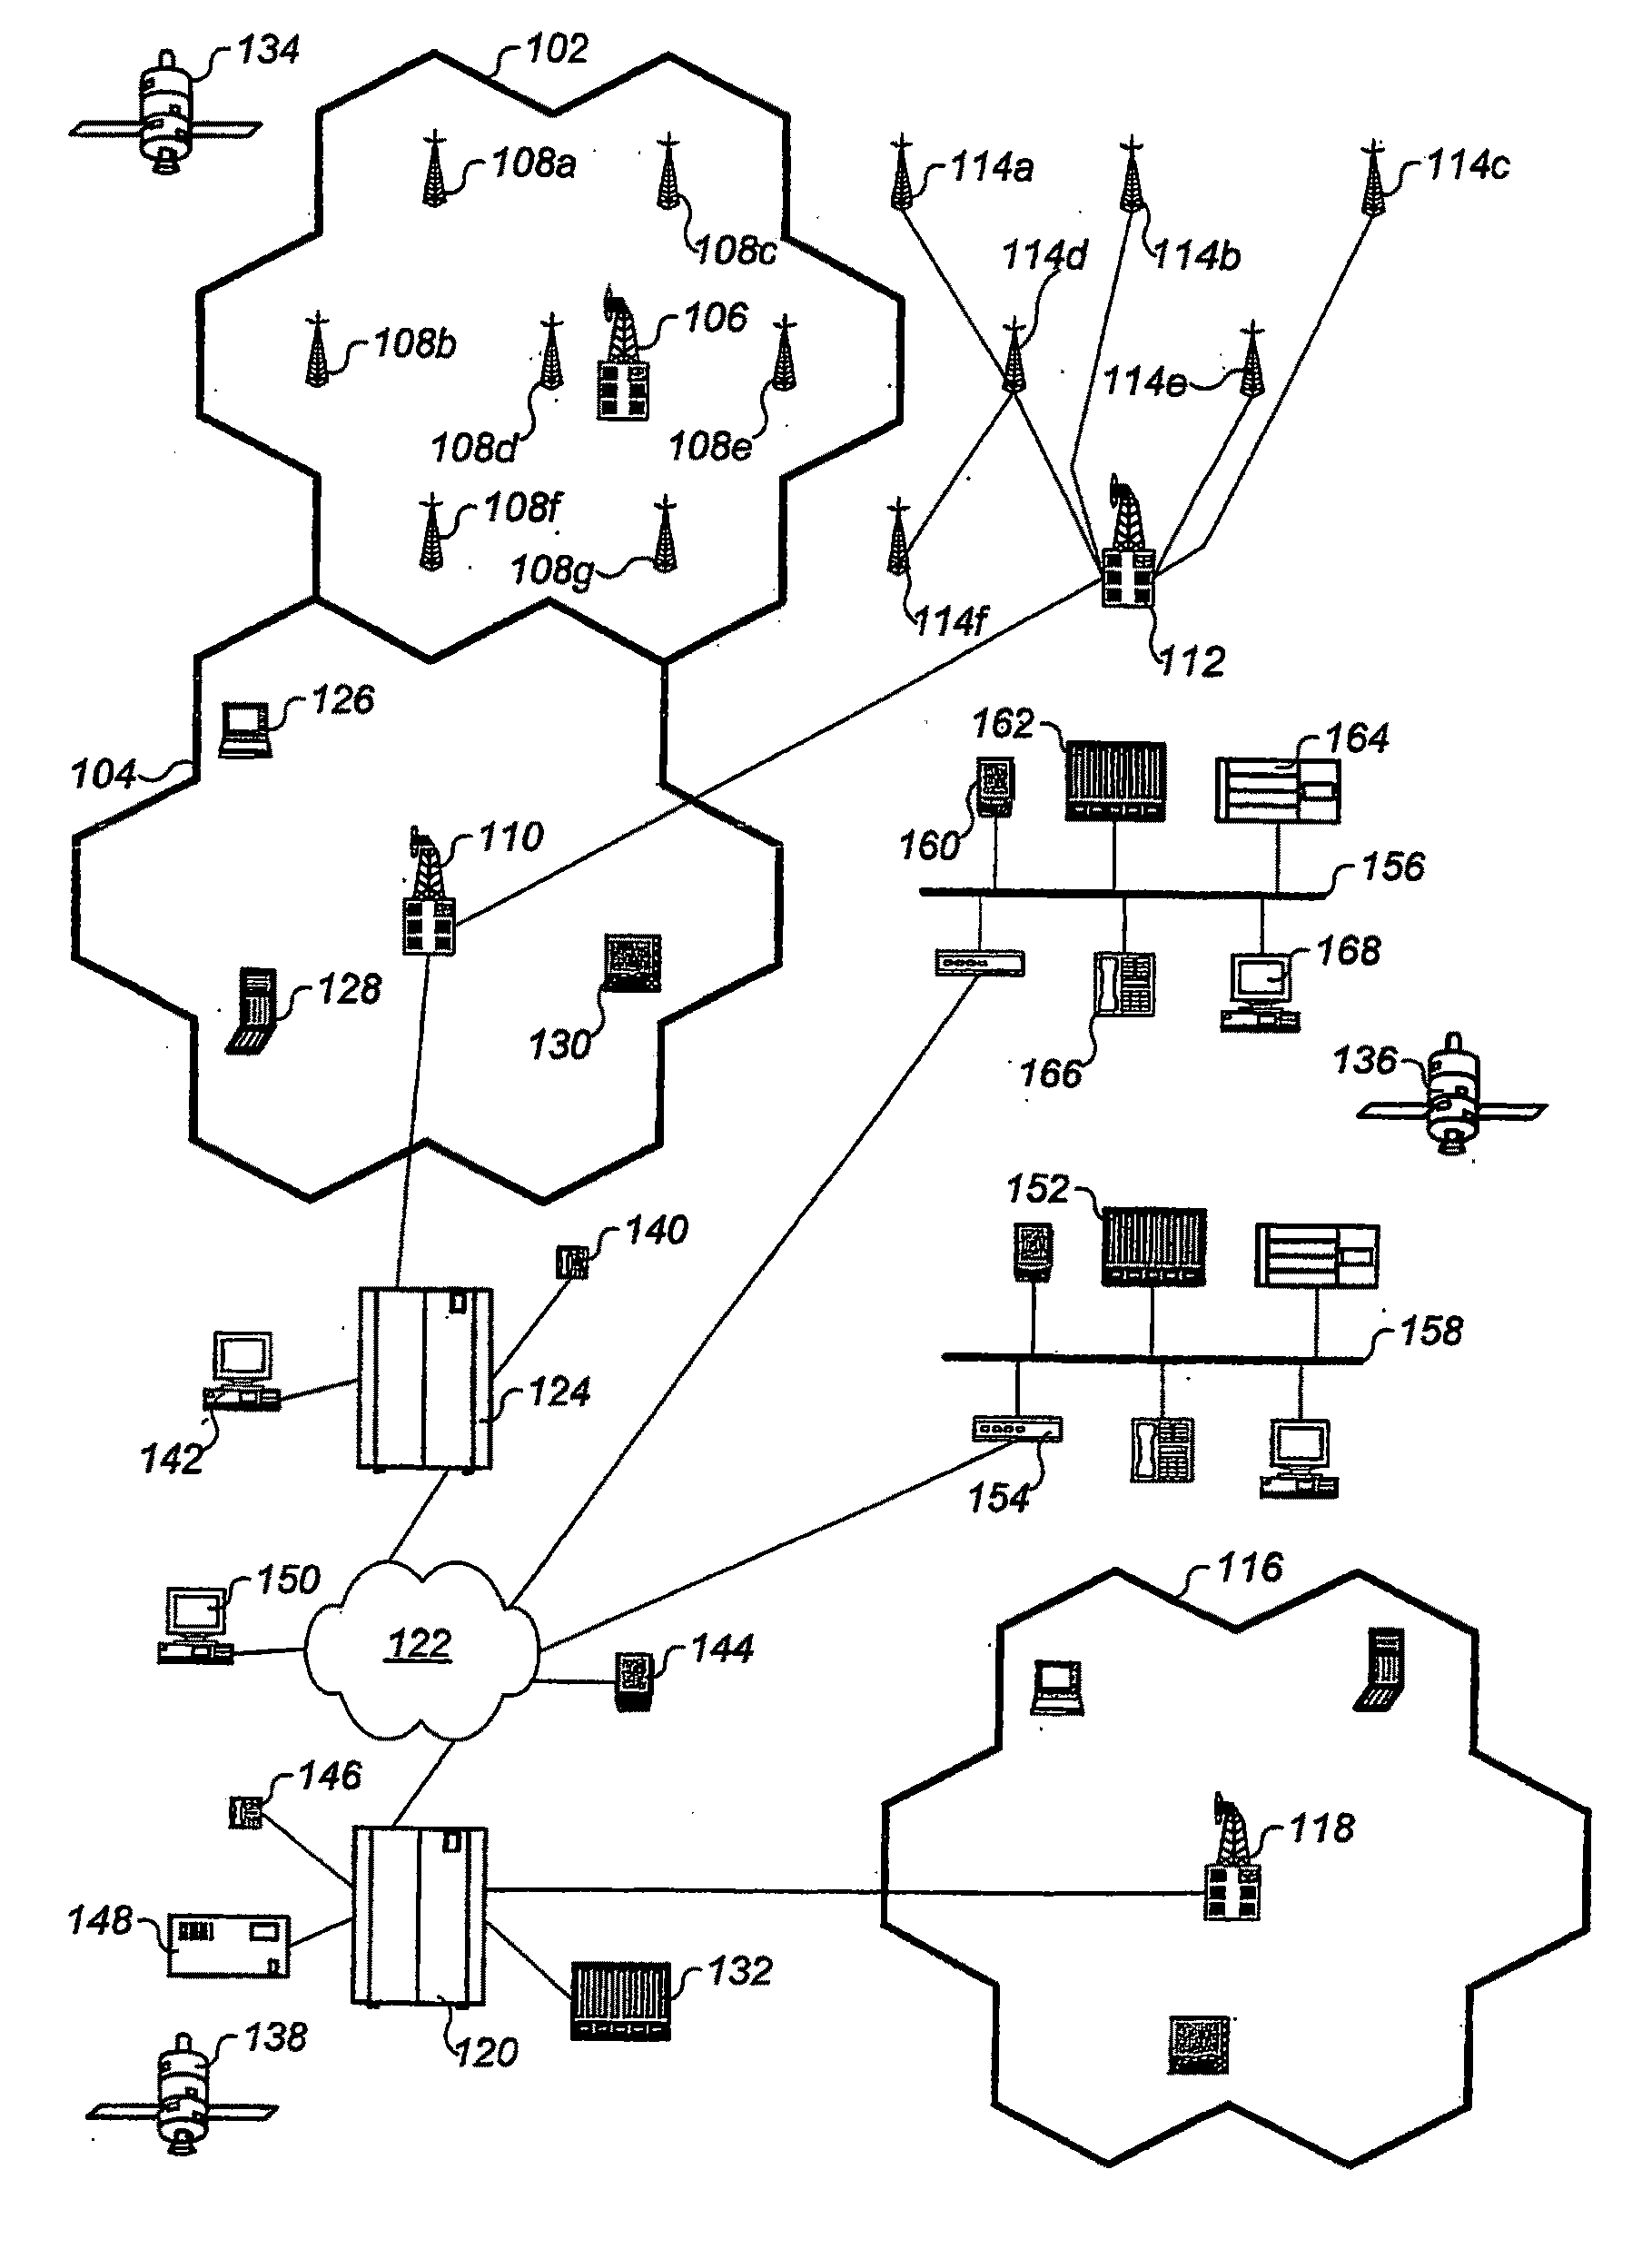 System and method for alerting a first mobile data processing system nearby a second mobile data processing system